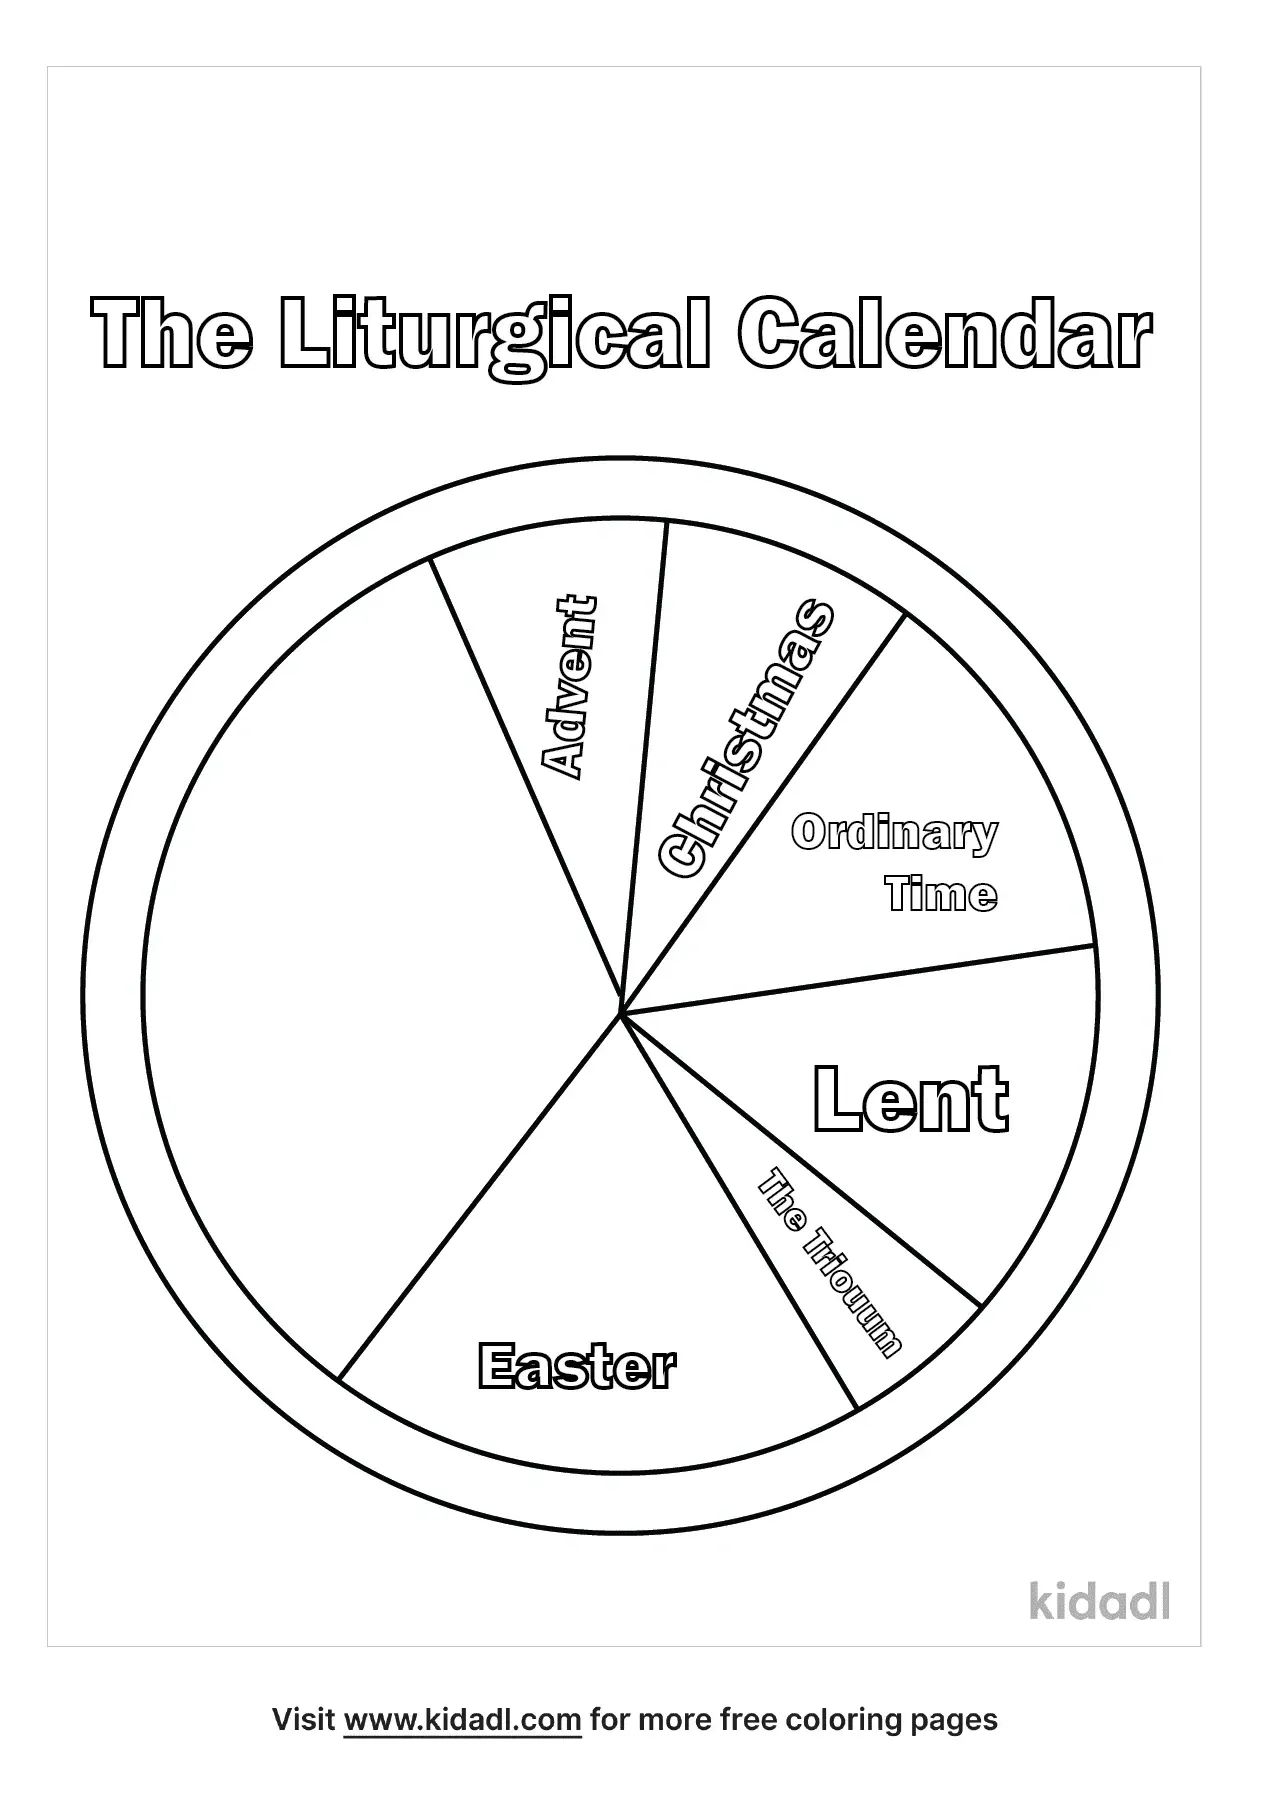 Free Liturgical Calendar Coloring Page